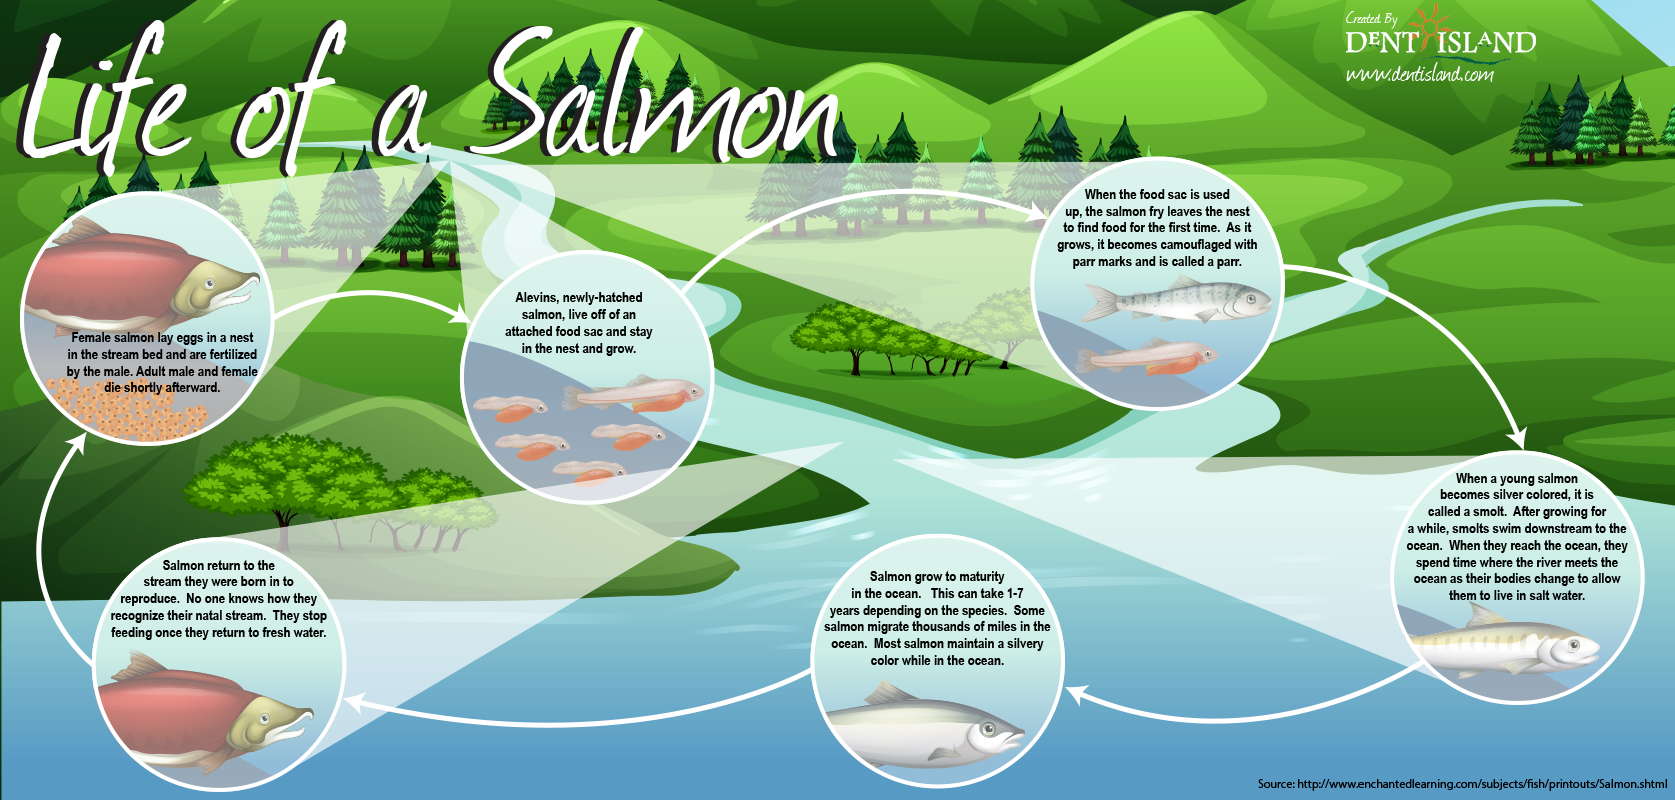 Life-of-a-Salmon (1)